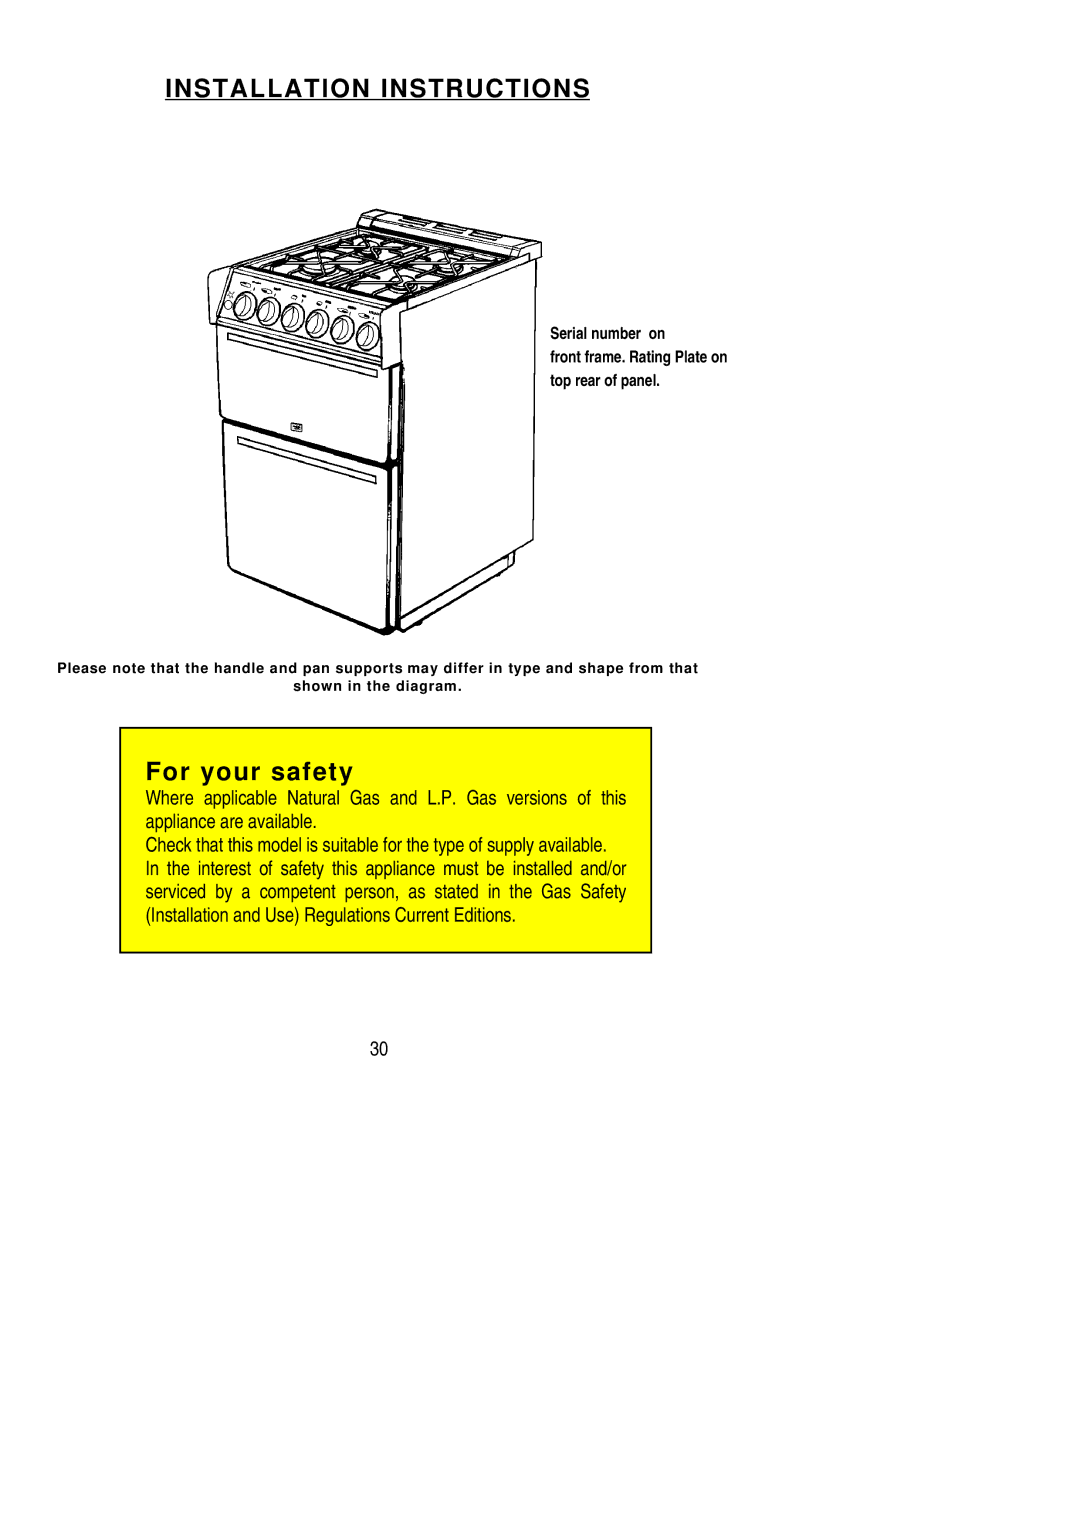 Electrolux SG305 installation instructions Installation Instructions 